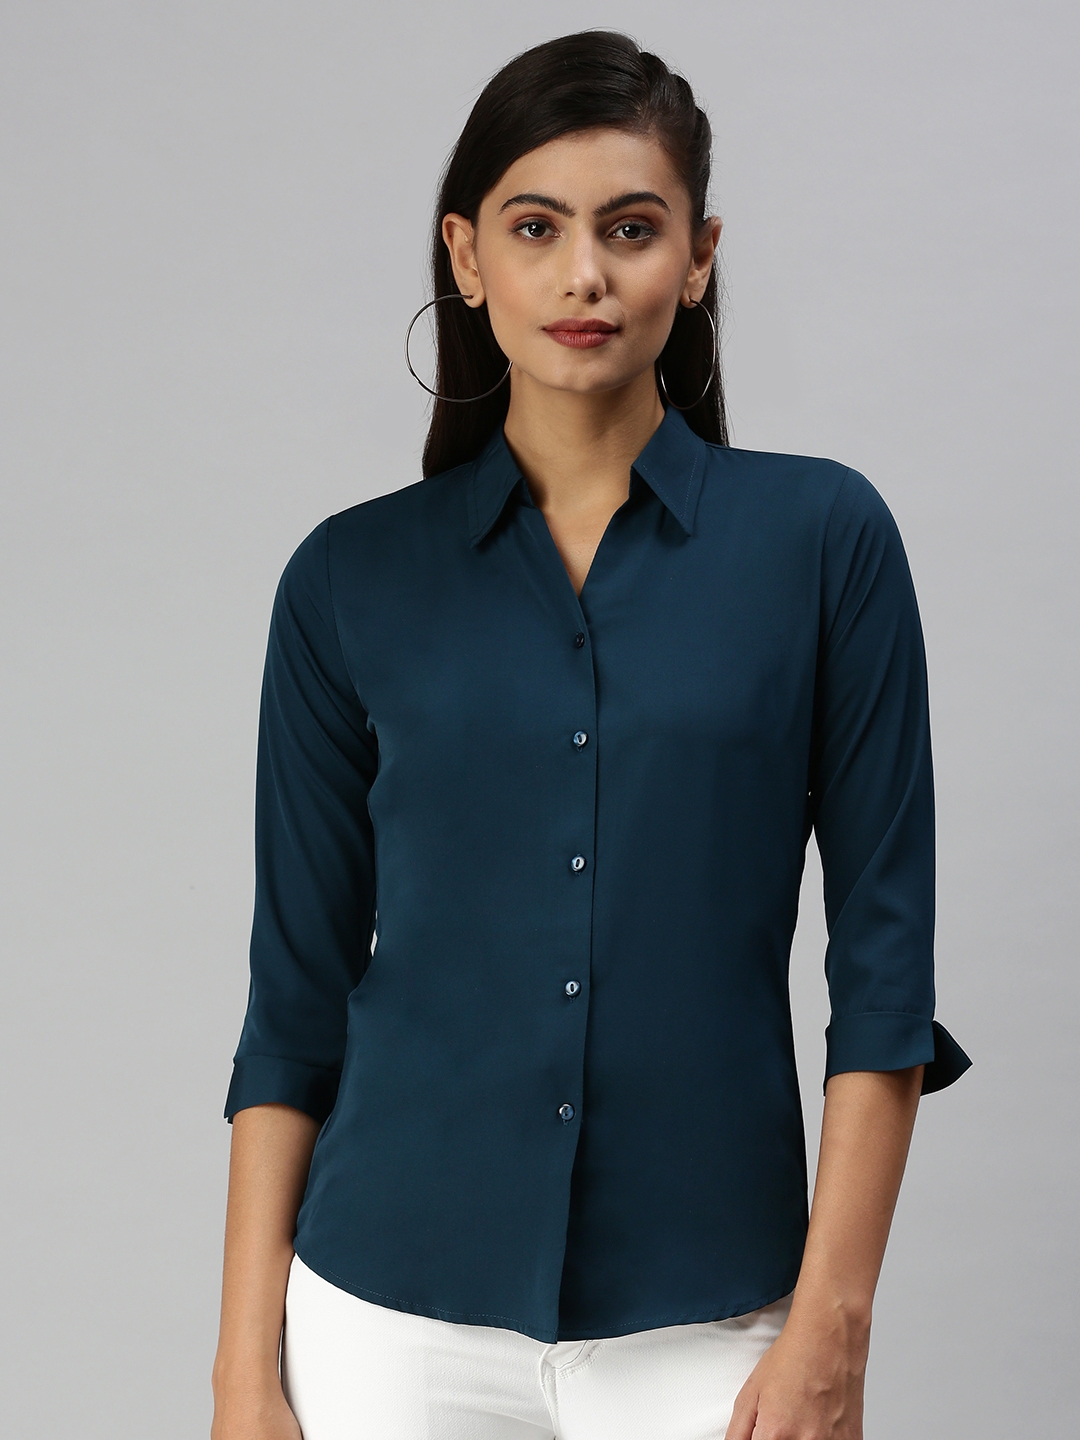 Women's Blue Polyester Solid Casual Shirts